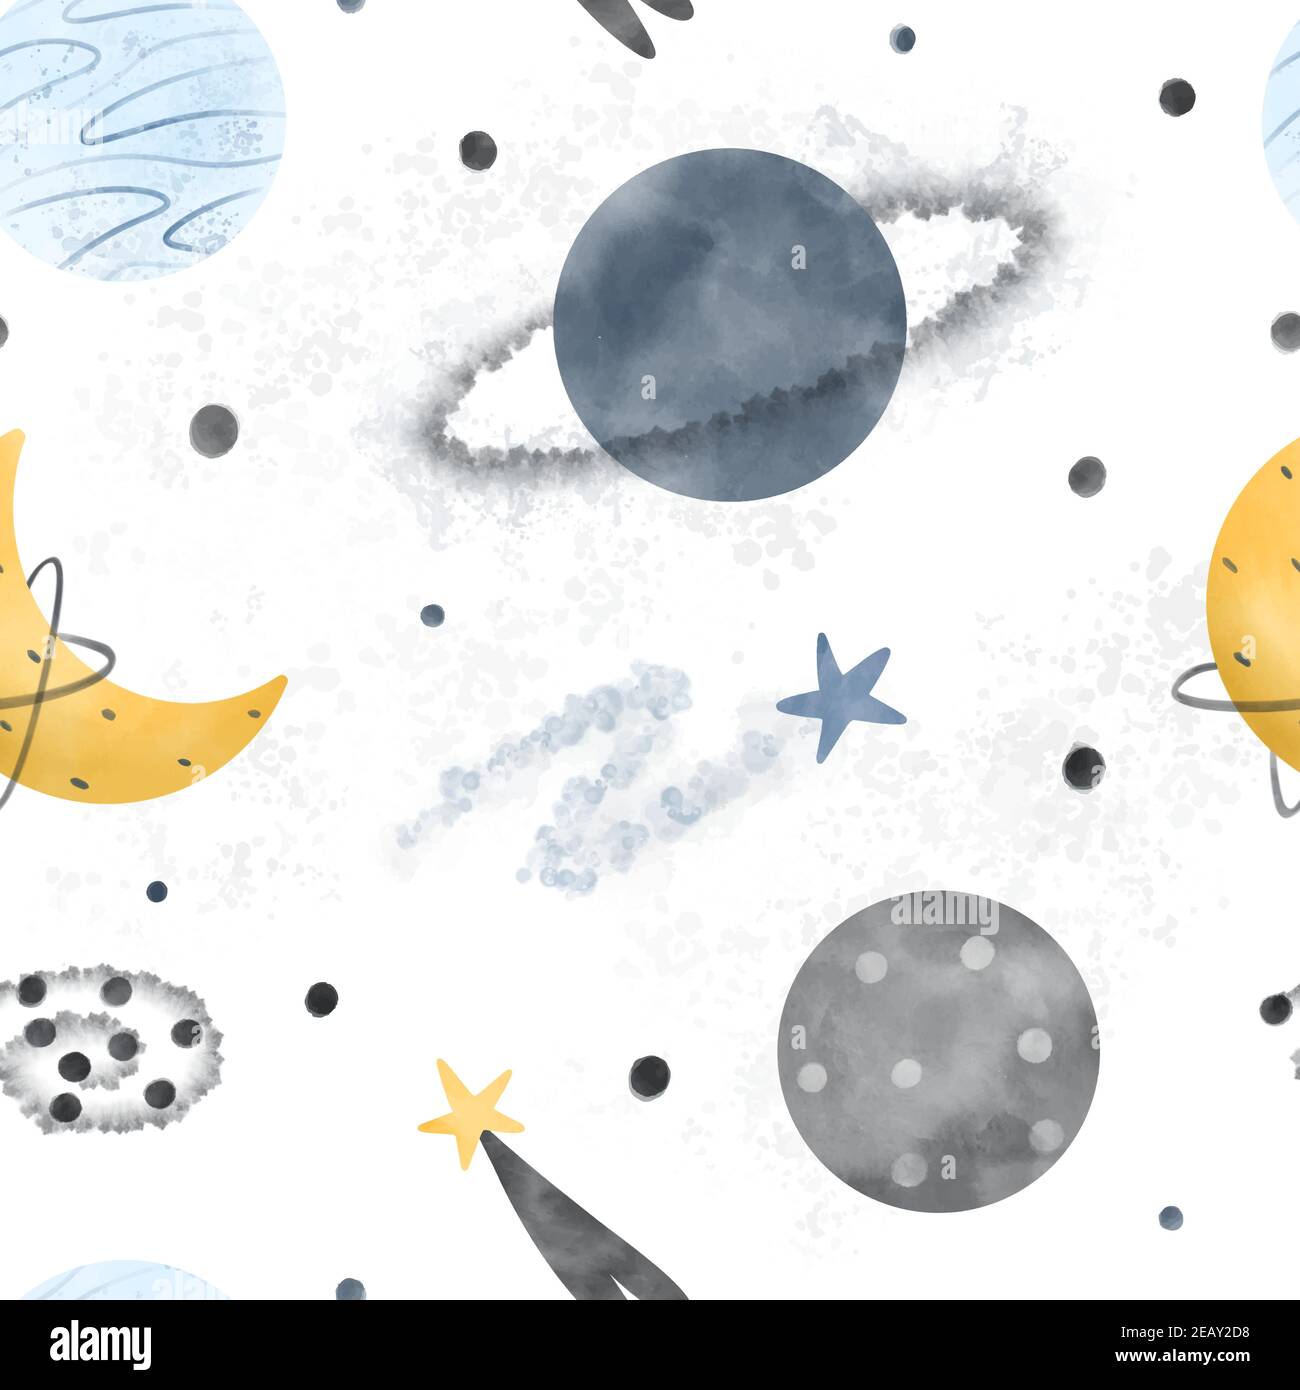 Celestial seamless pattern with space elements: moon, planets, stars, constellations, galaxies. Hand drawn watercolor Scandinavian style vector illust Stock Vector